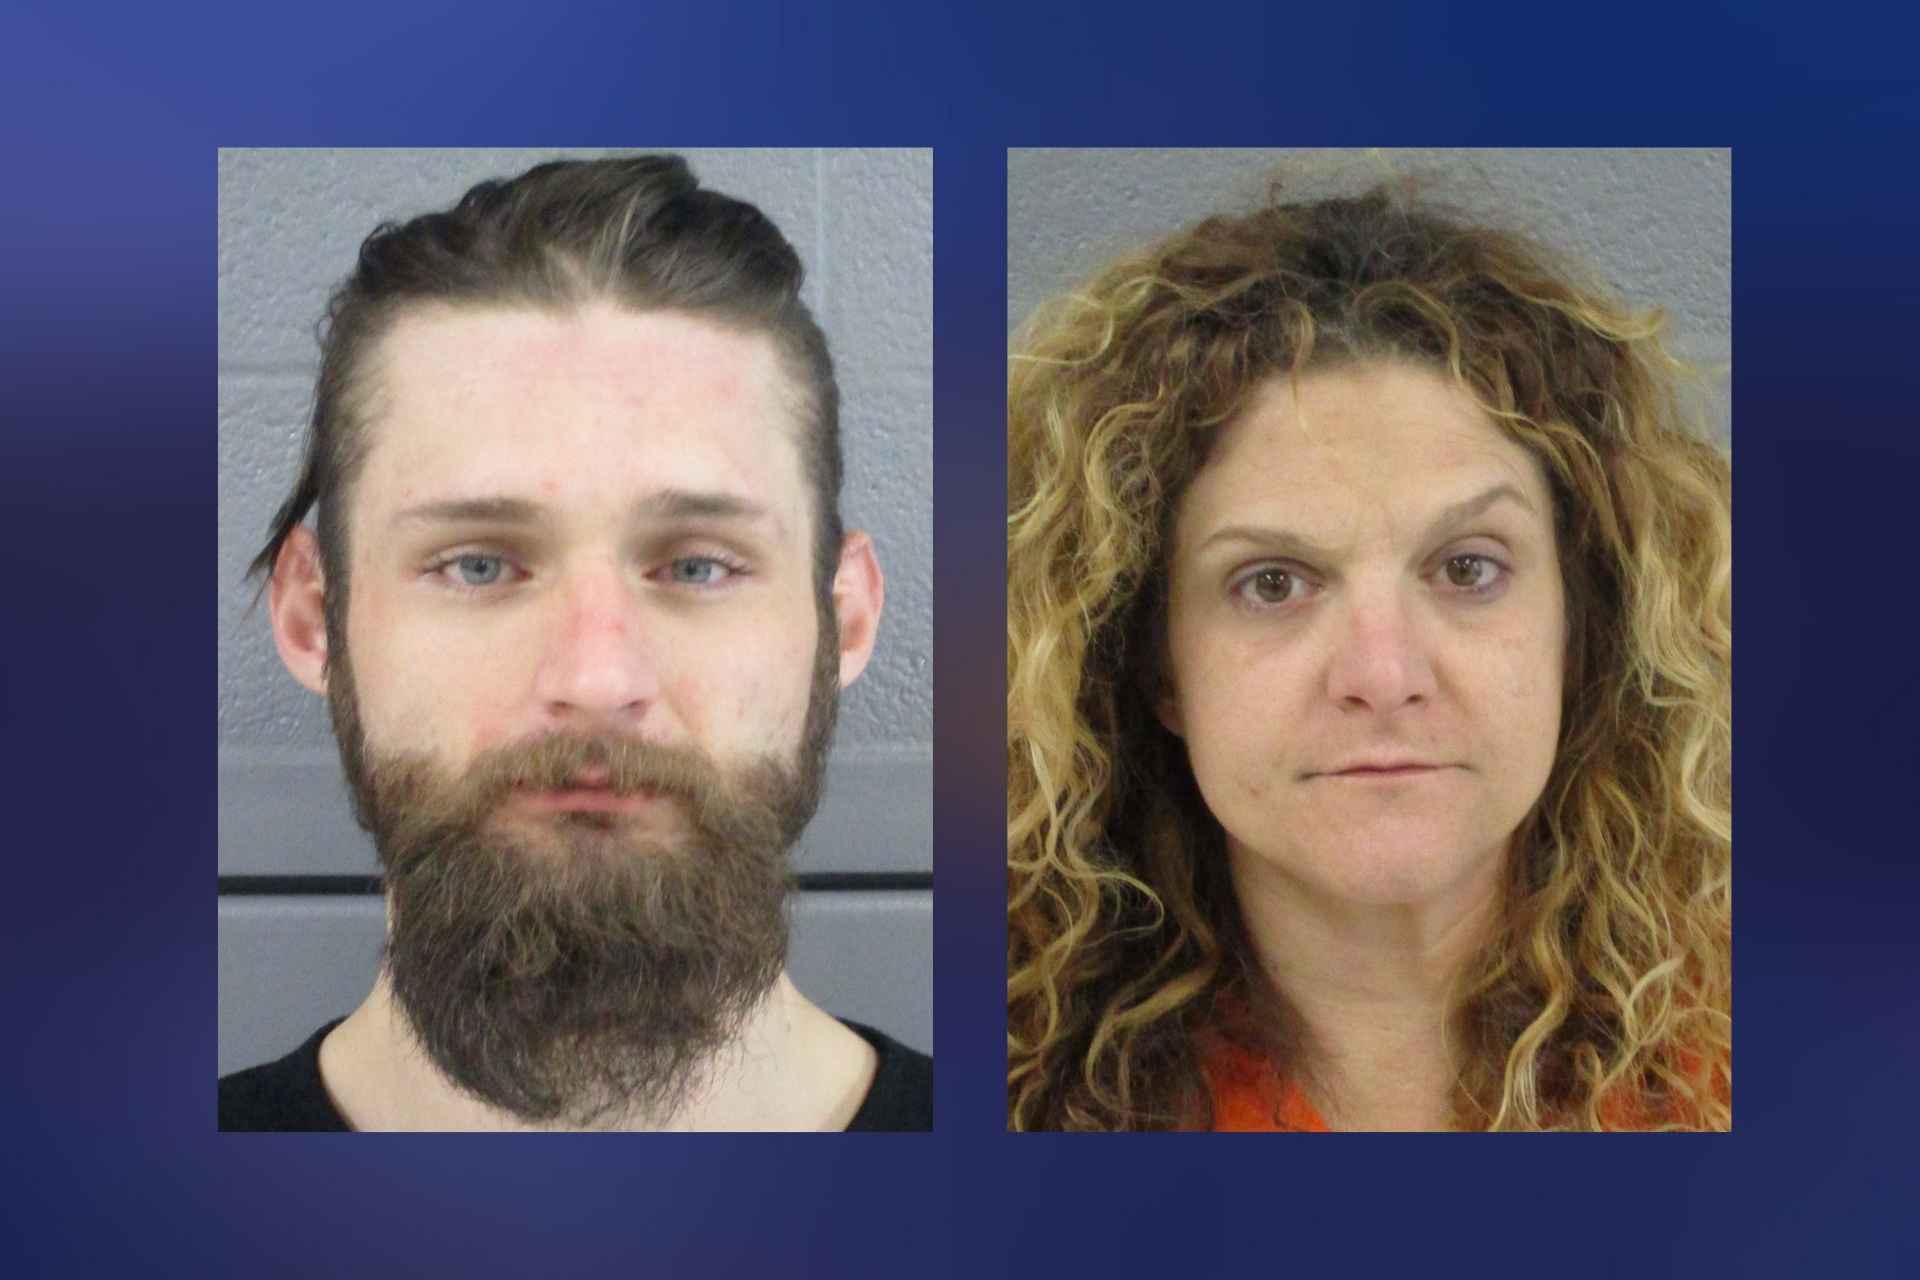 Two arrested on drug-related charges following traffic stop at dangerous Route 33 intersection pic